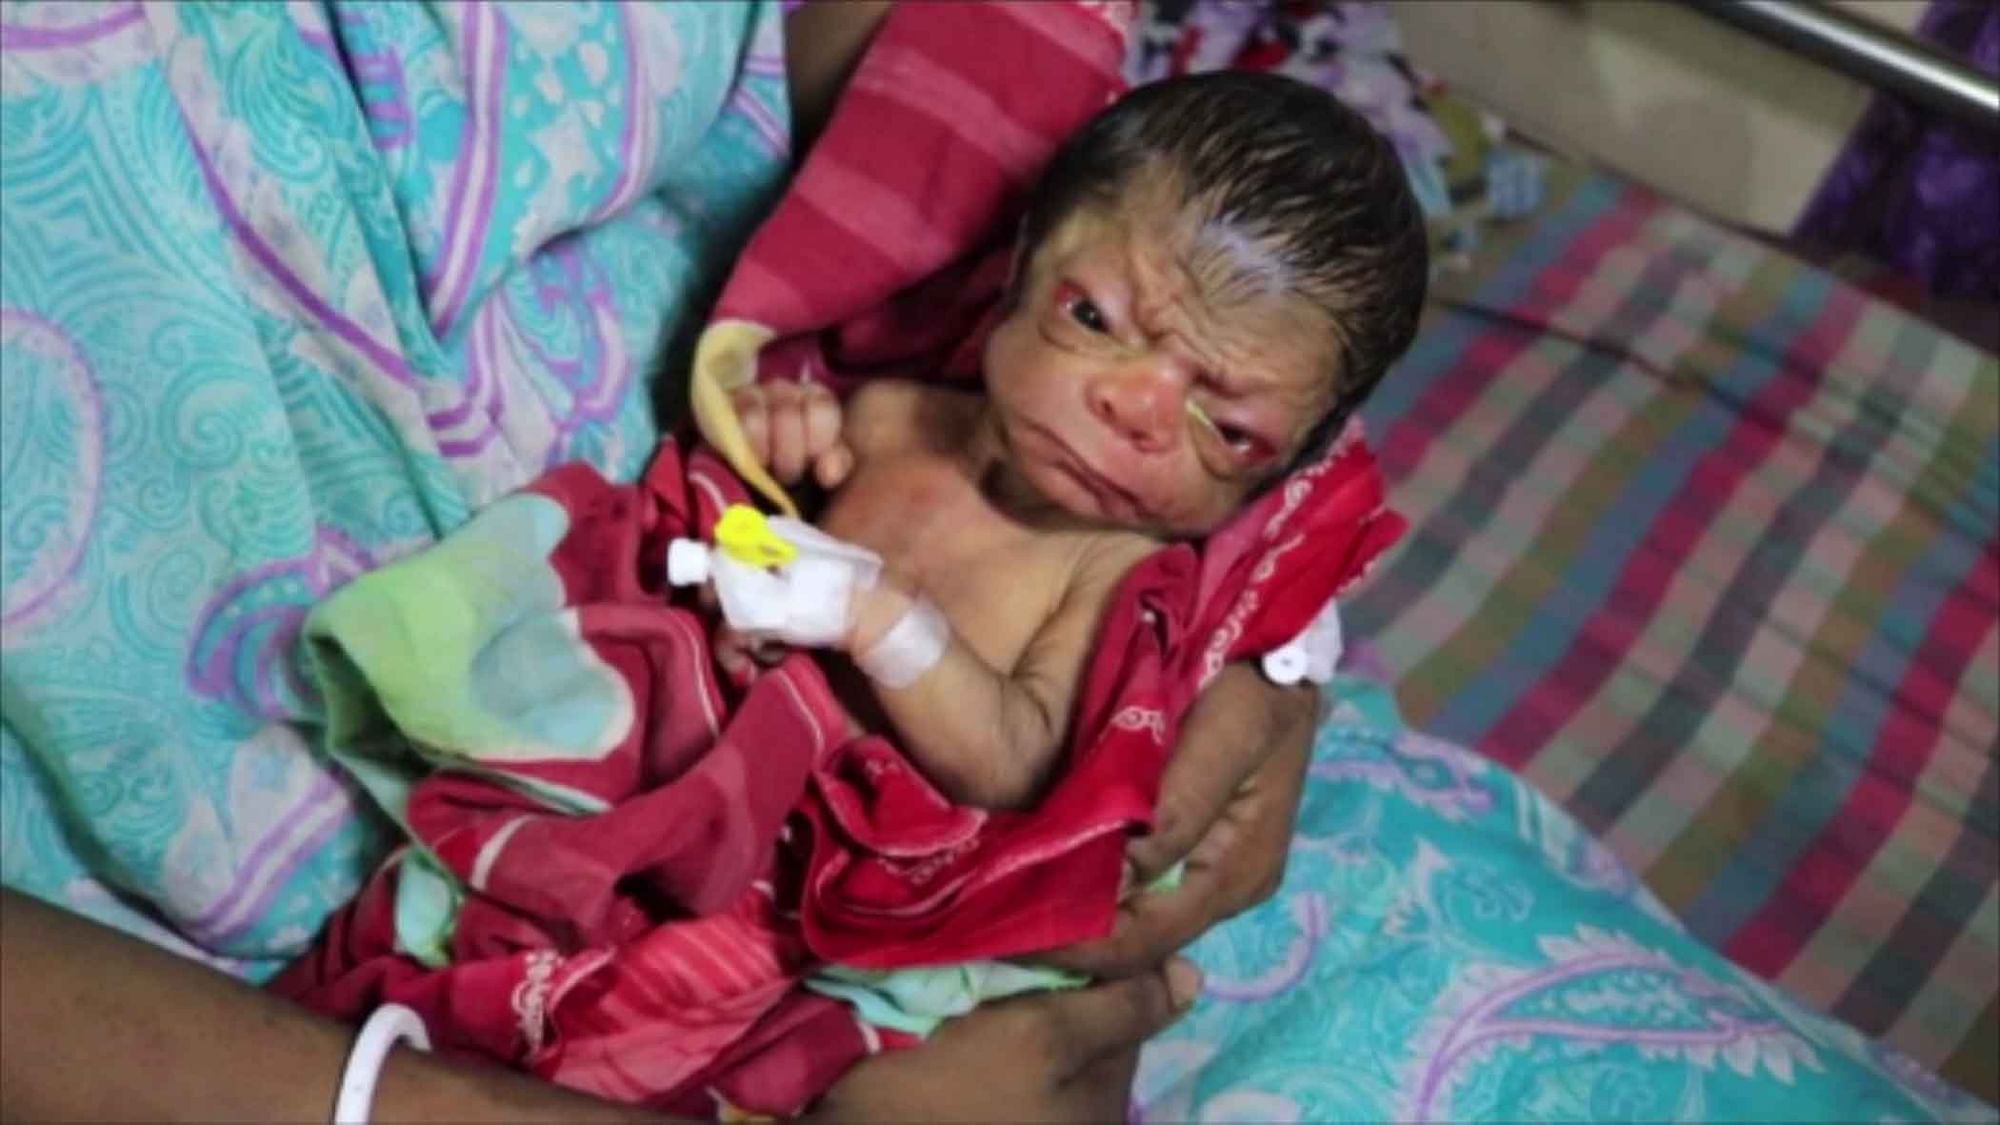 A baby born in Bangladesh who suffer from Progeria, a rare genetic disease.(Photo Courtesy: AP Screengrab)